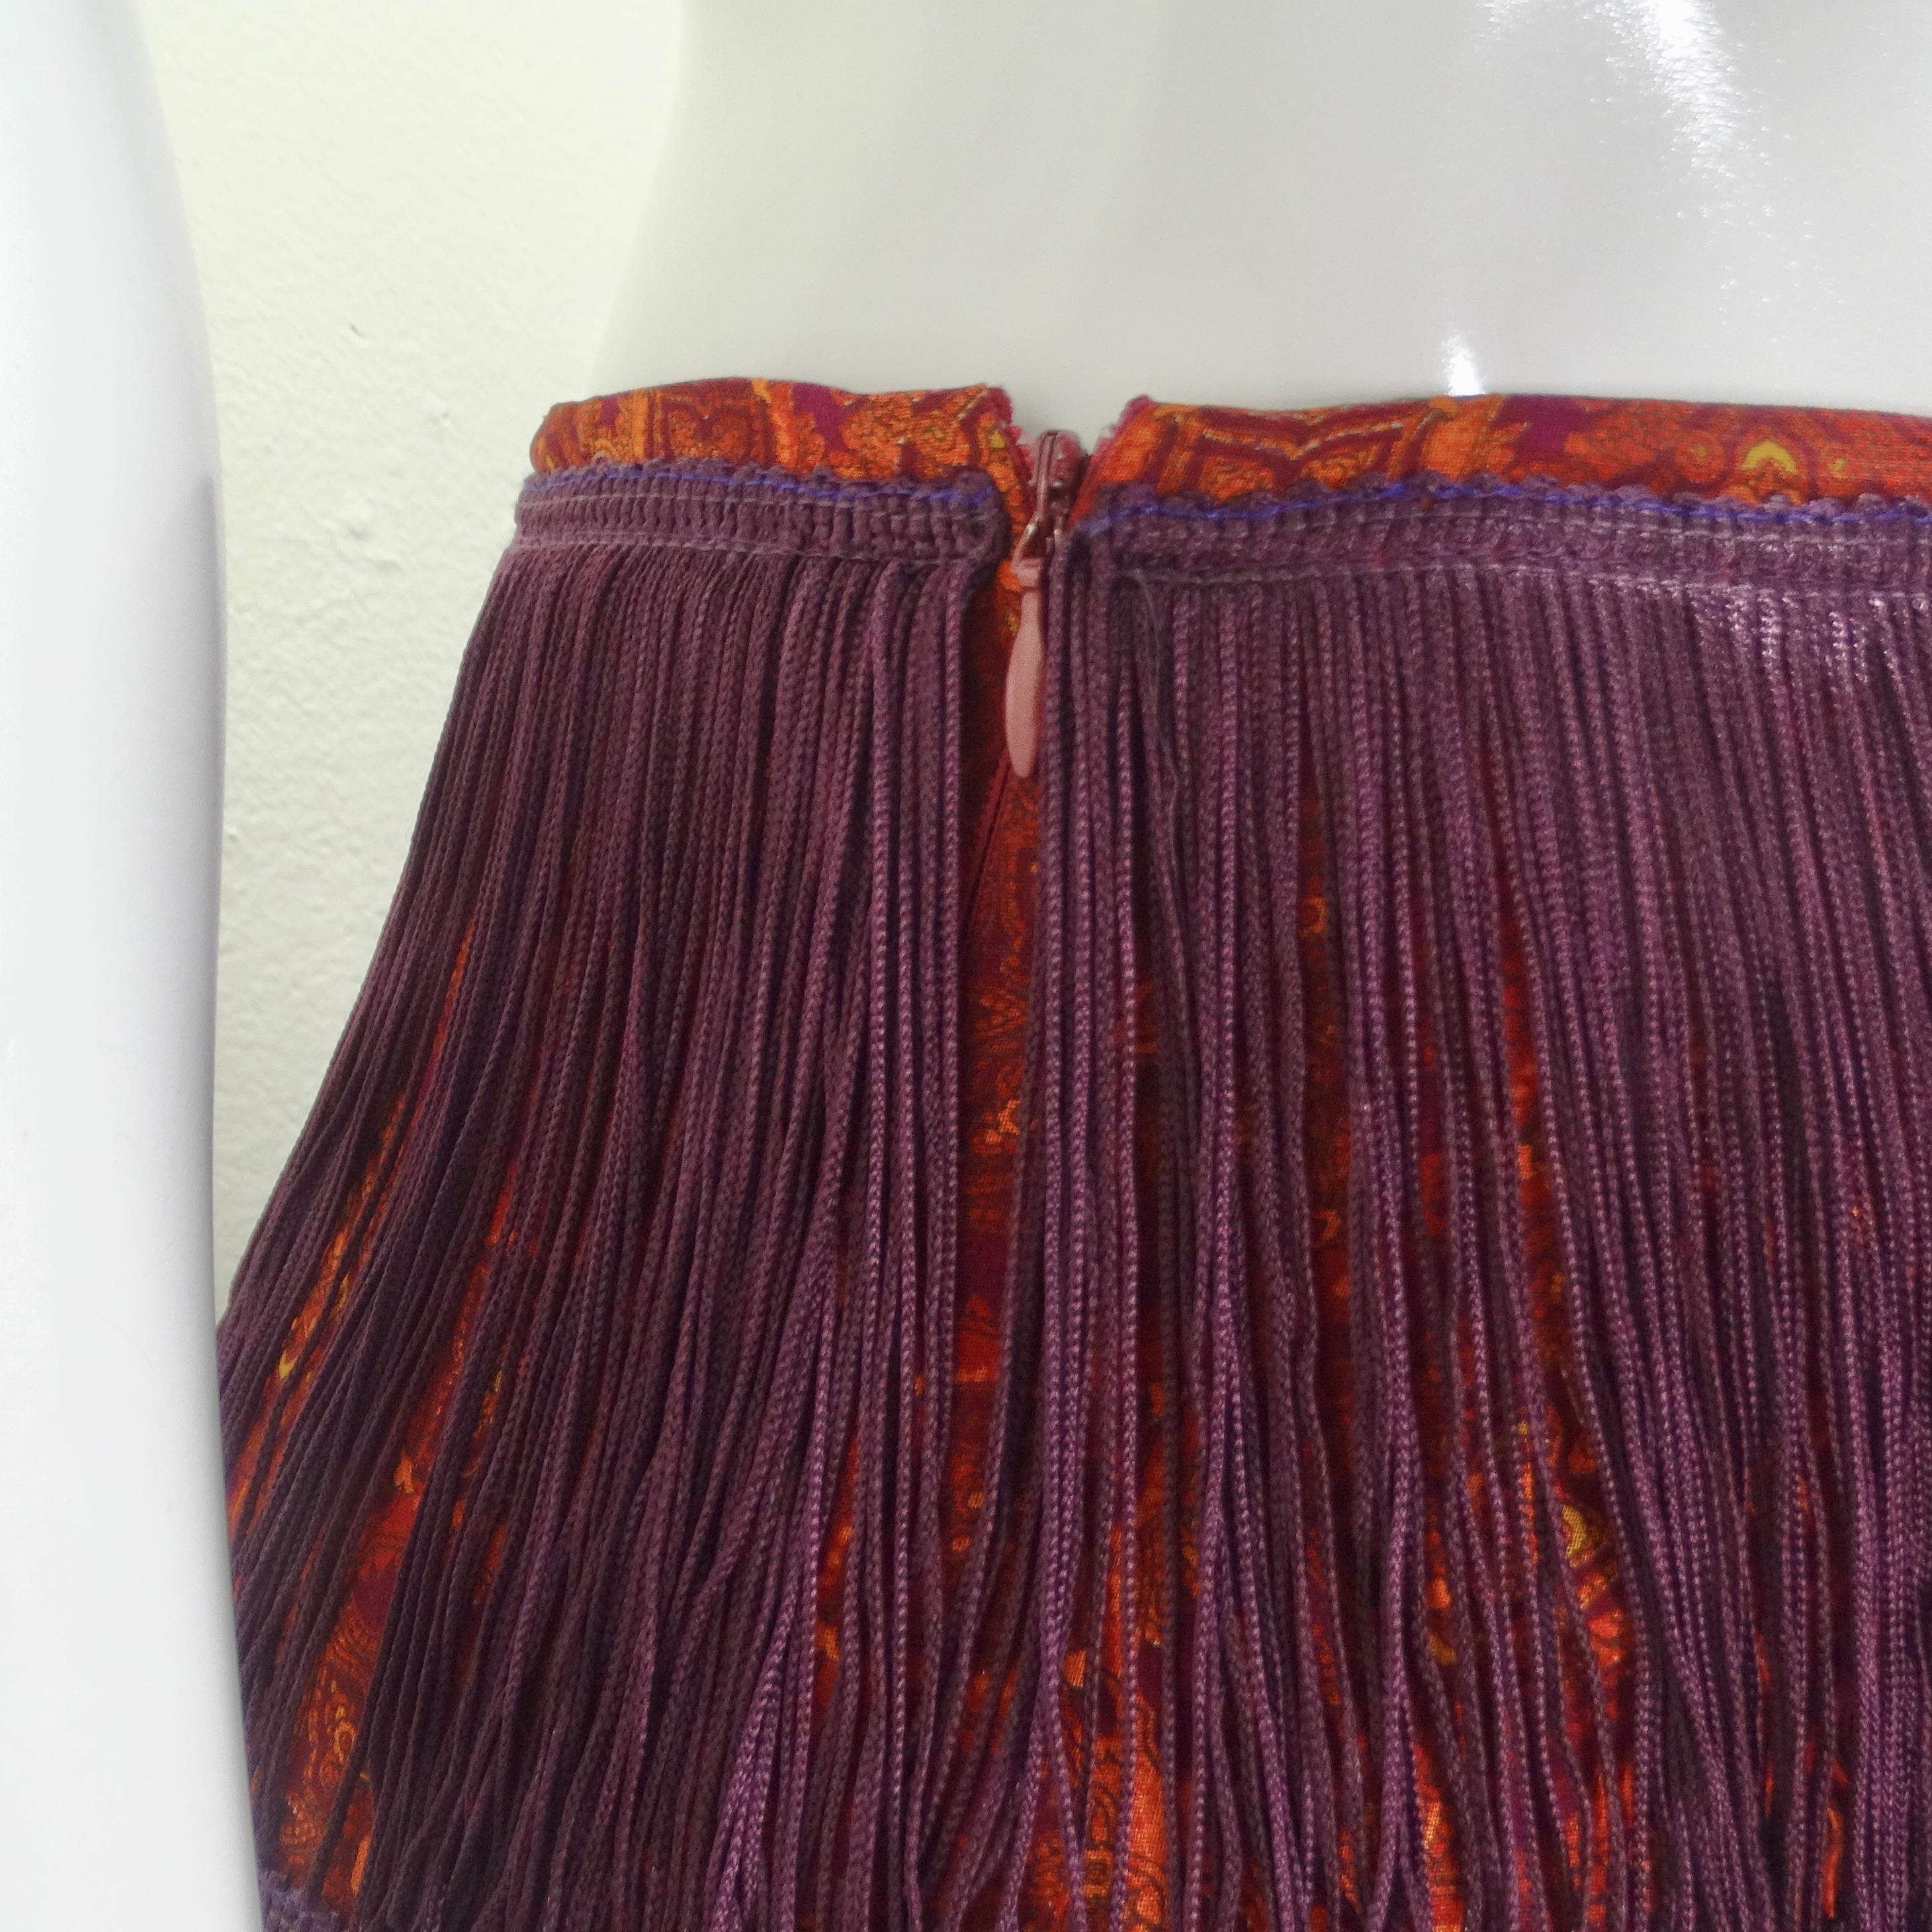 Get your hands on the Dolce & Gabbana Y2K Fringe Maxi Skirt – a captivating and lively piece that perfectly captures the spirit of the early 2000s. The early 2000s were all about bold, expressive fashion, and this skirt is a fabulous nod to that